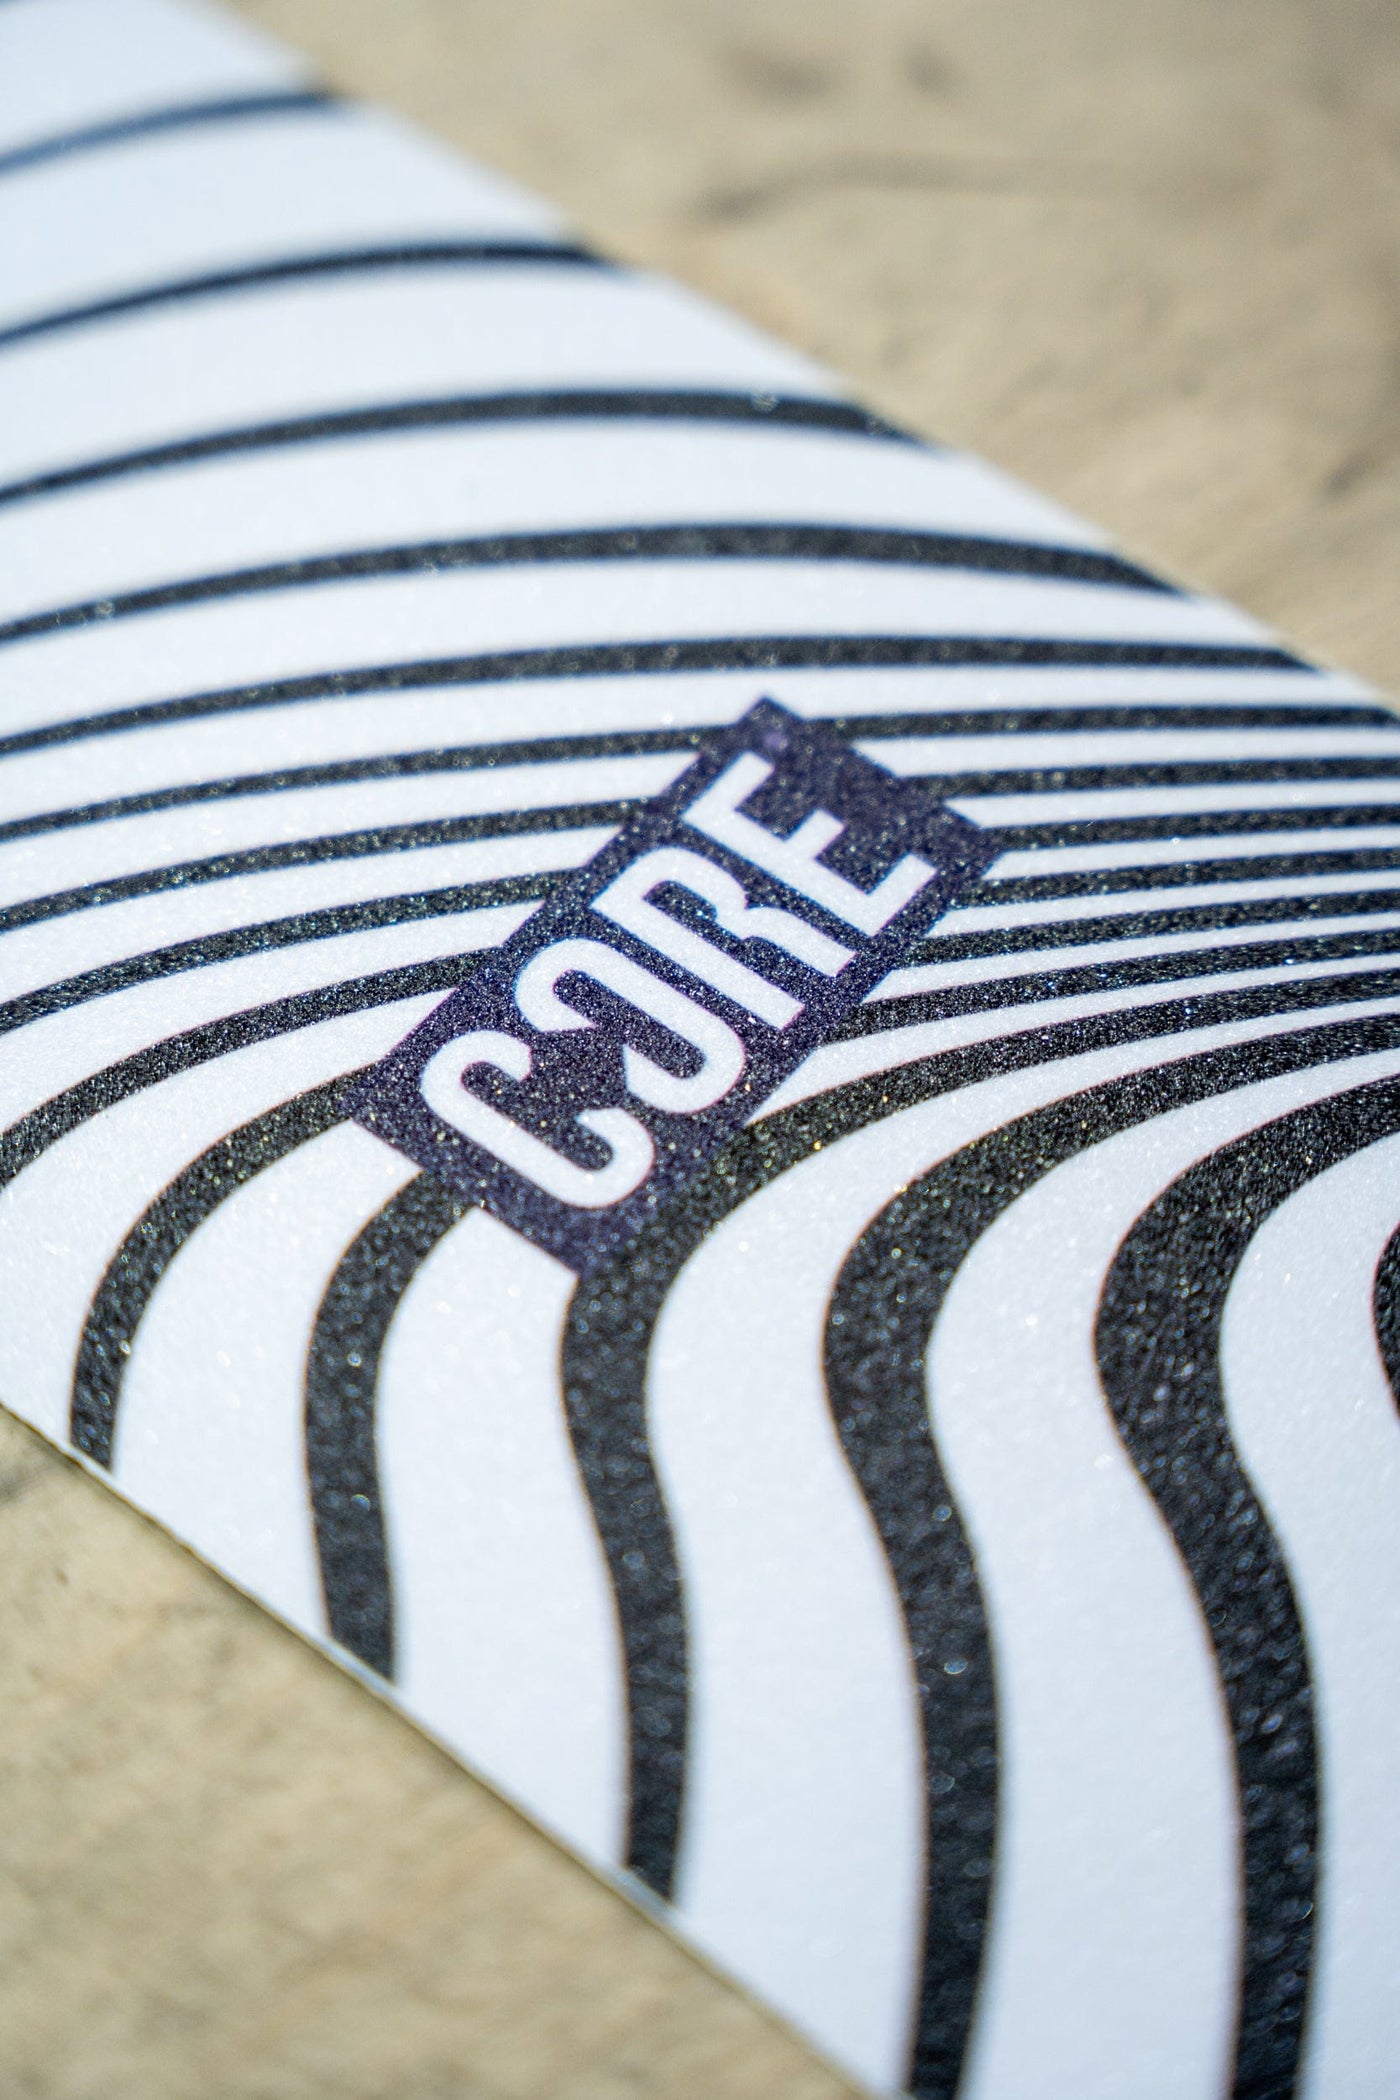 CORE Scooter Grip Tape Vibe White I Grip Tape Scooter Middle